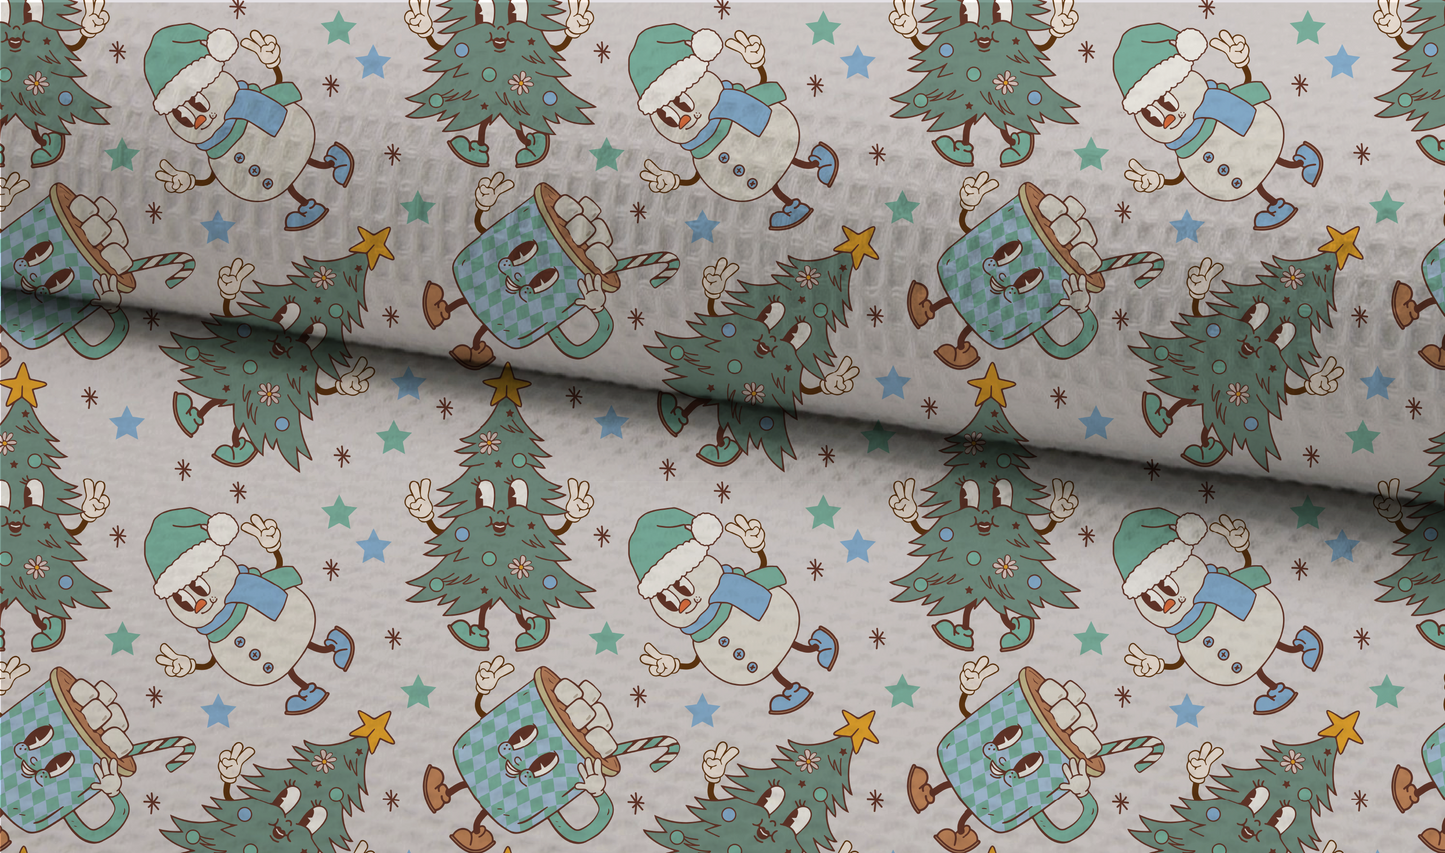 Christmas Cartoons Seamless Pattern, Groovy Xmas Blue Pattern for Fabric Sublimation